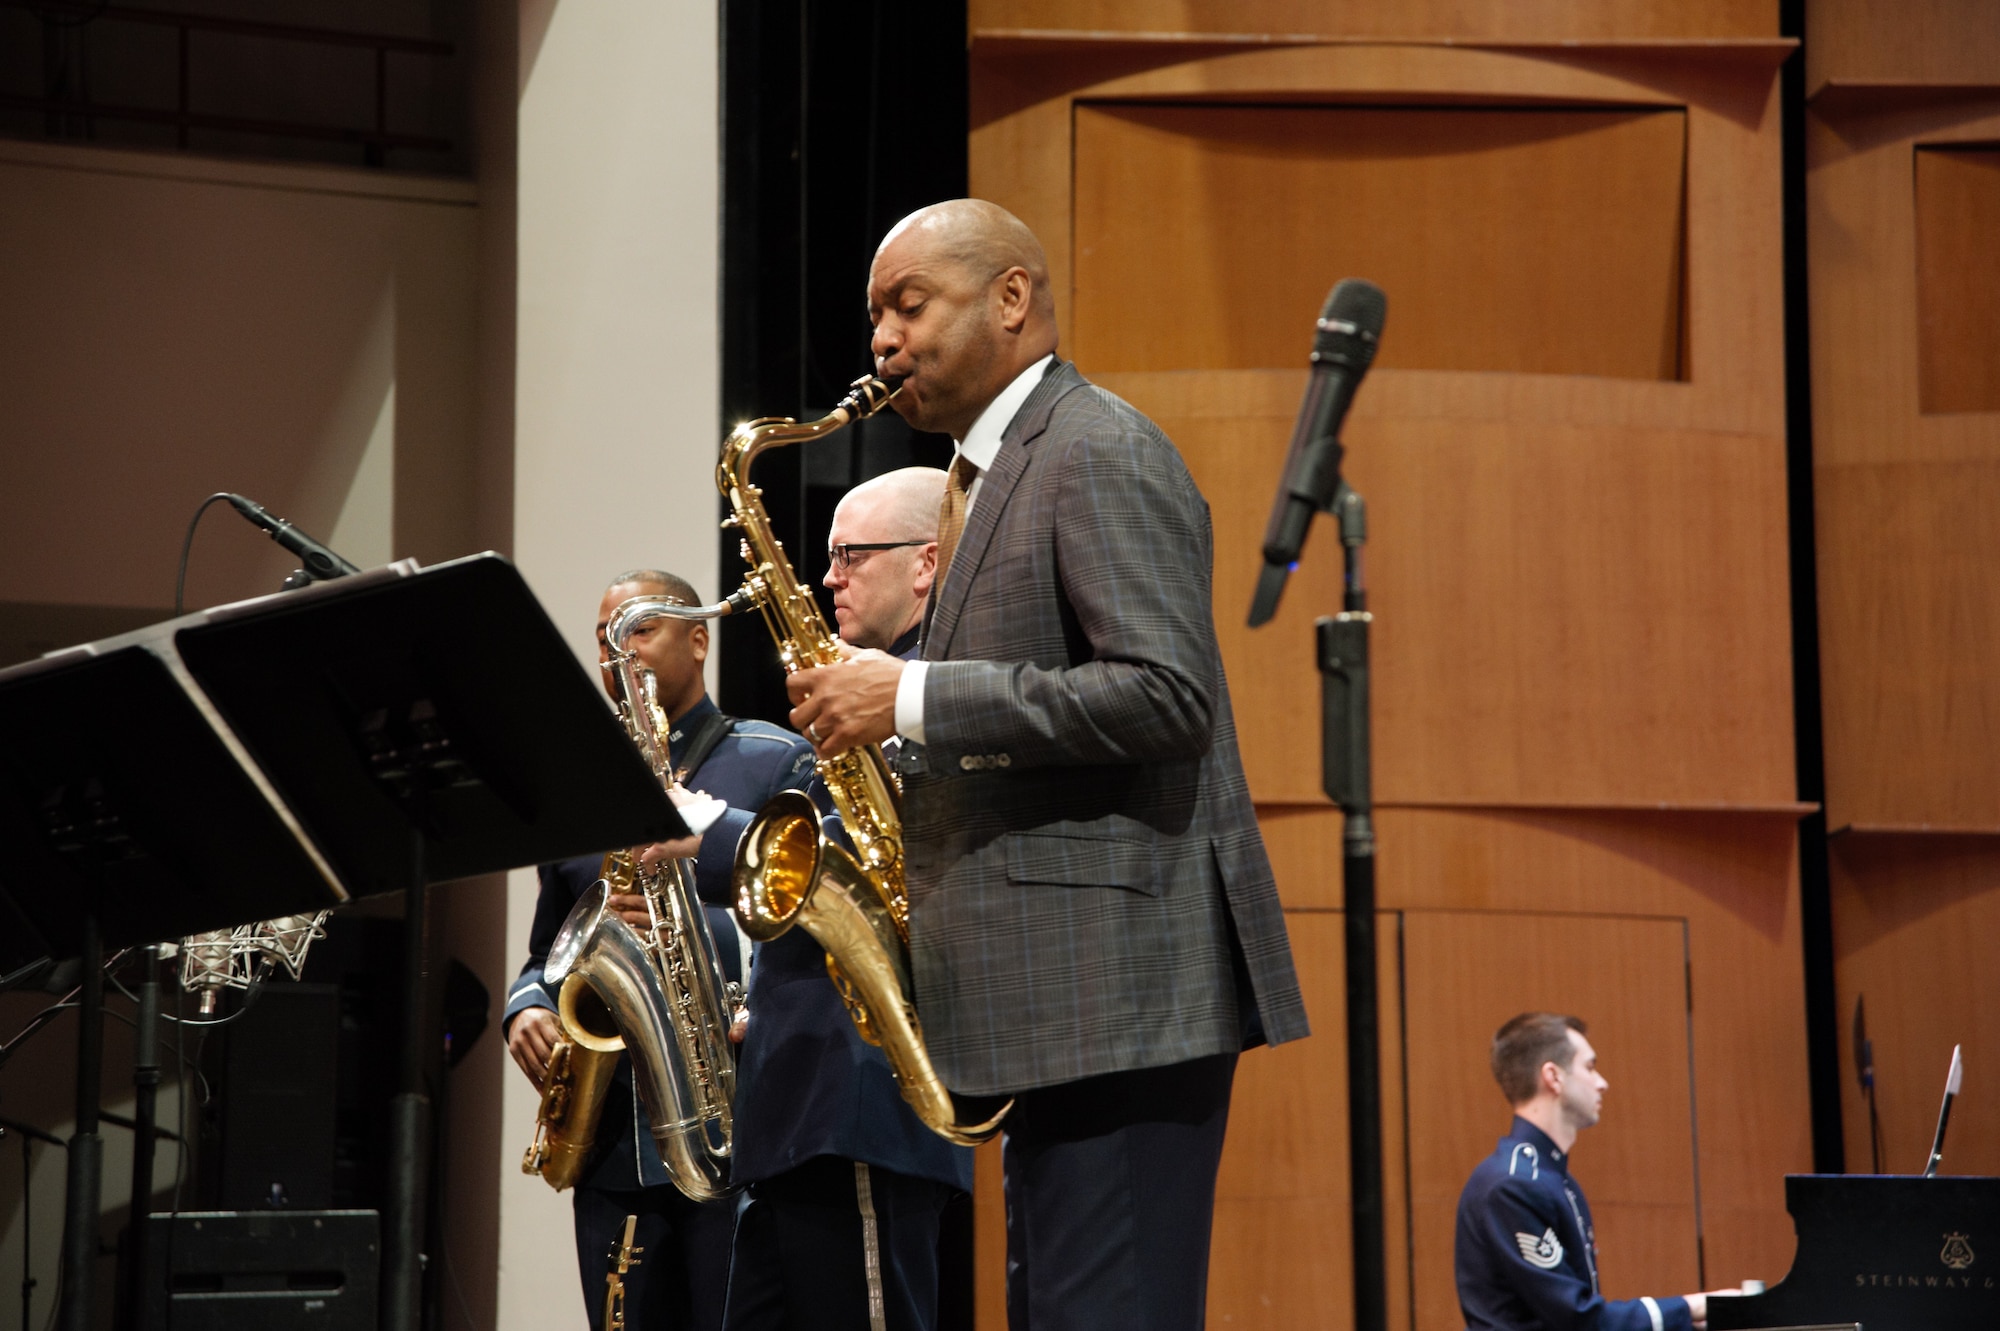 Legendary saxophonist Branford Marsalis sat in as the season's final guest with Airmen of Note April 5 at the Rachel M. Schlesinger Concert Hall and Arts Center on Northern Virginia Community College’s Alexandria campus. Each month, The Air Force Band's premiere jazz ensemble welcomes a jazz artist to sit in with the troupe and bring a unique concert opportunity to the public.